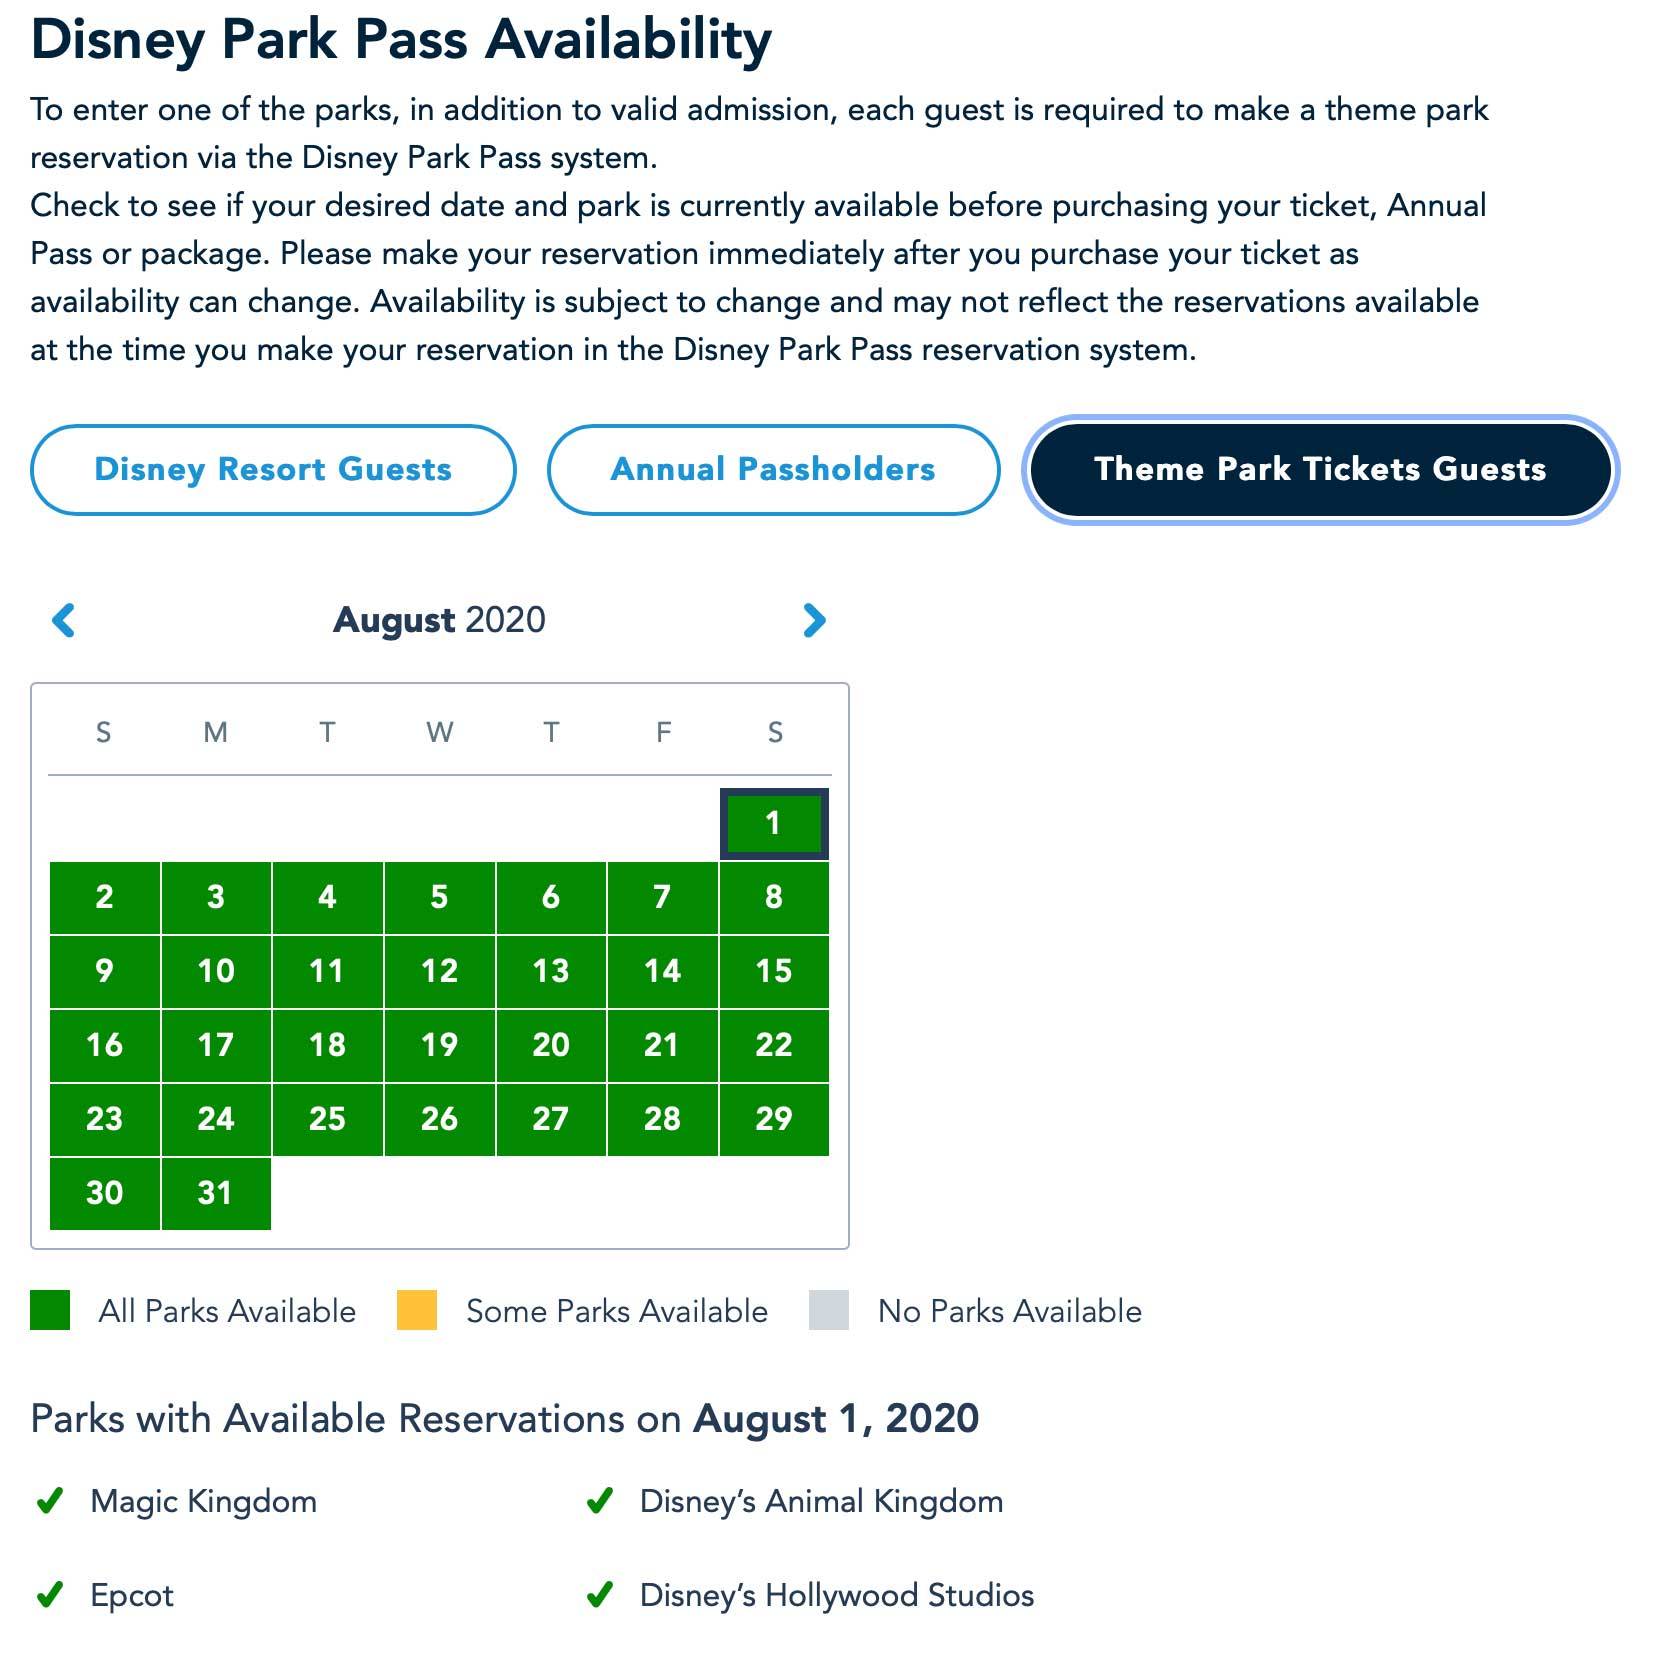 Disney Parks Pass availability continues to be in very short supply for Walt Disney World Annual Passholders